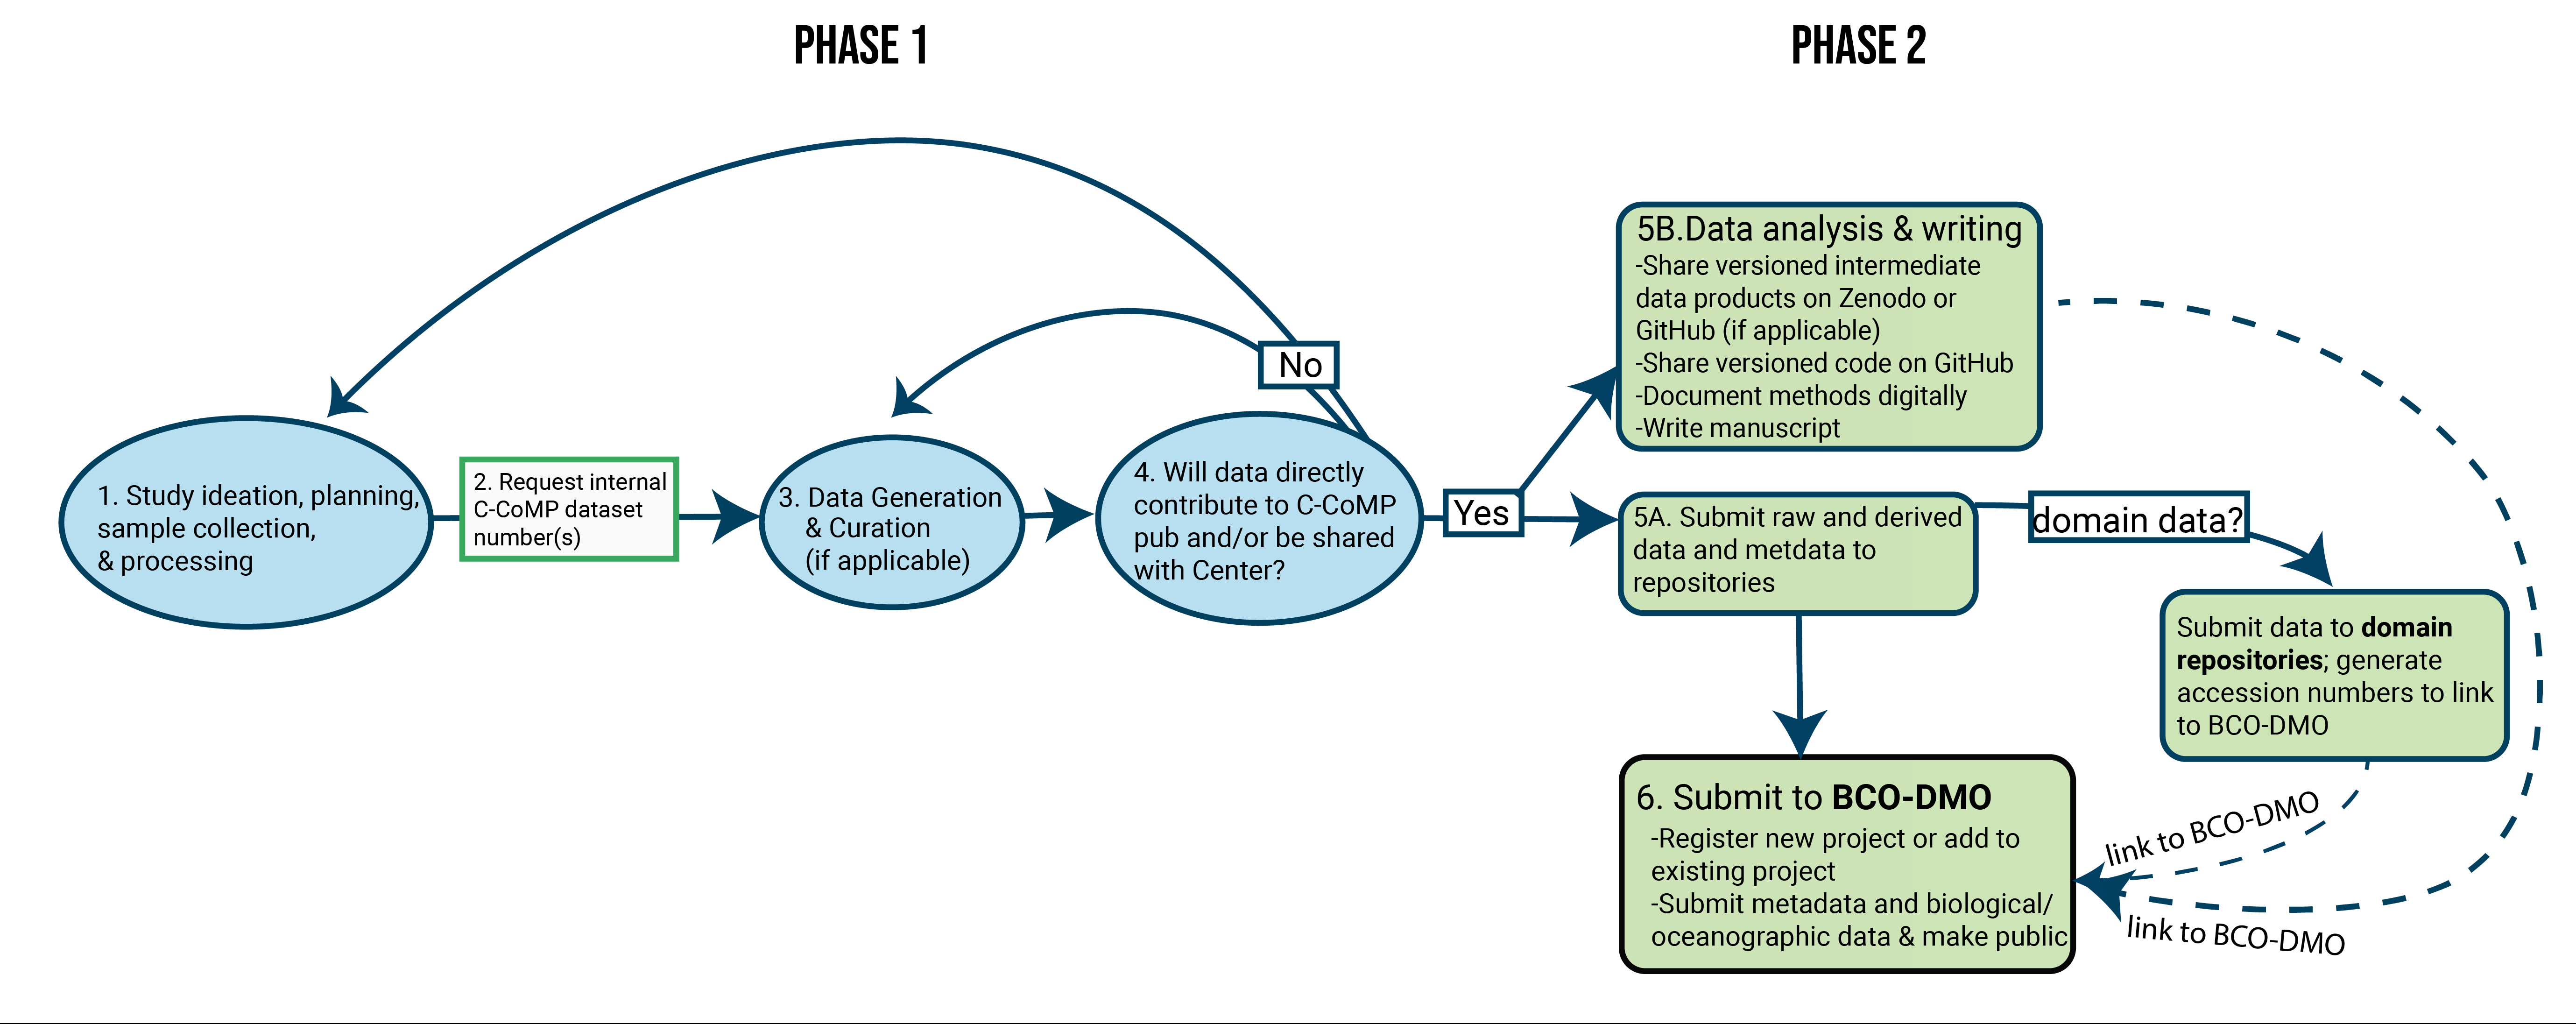 Figure flow chart outlining ordered instructions for how to deposit data in the context of the research life cycle; a detailed, step-by-step description is provided in the C-CoMP Data Management Handbook.